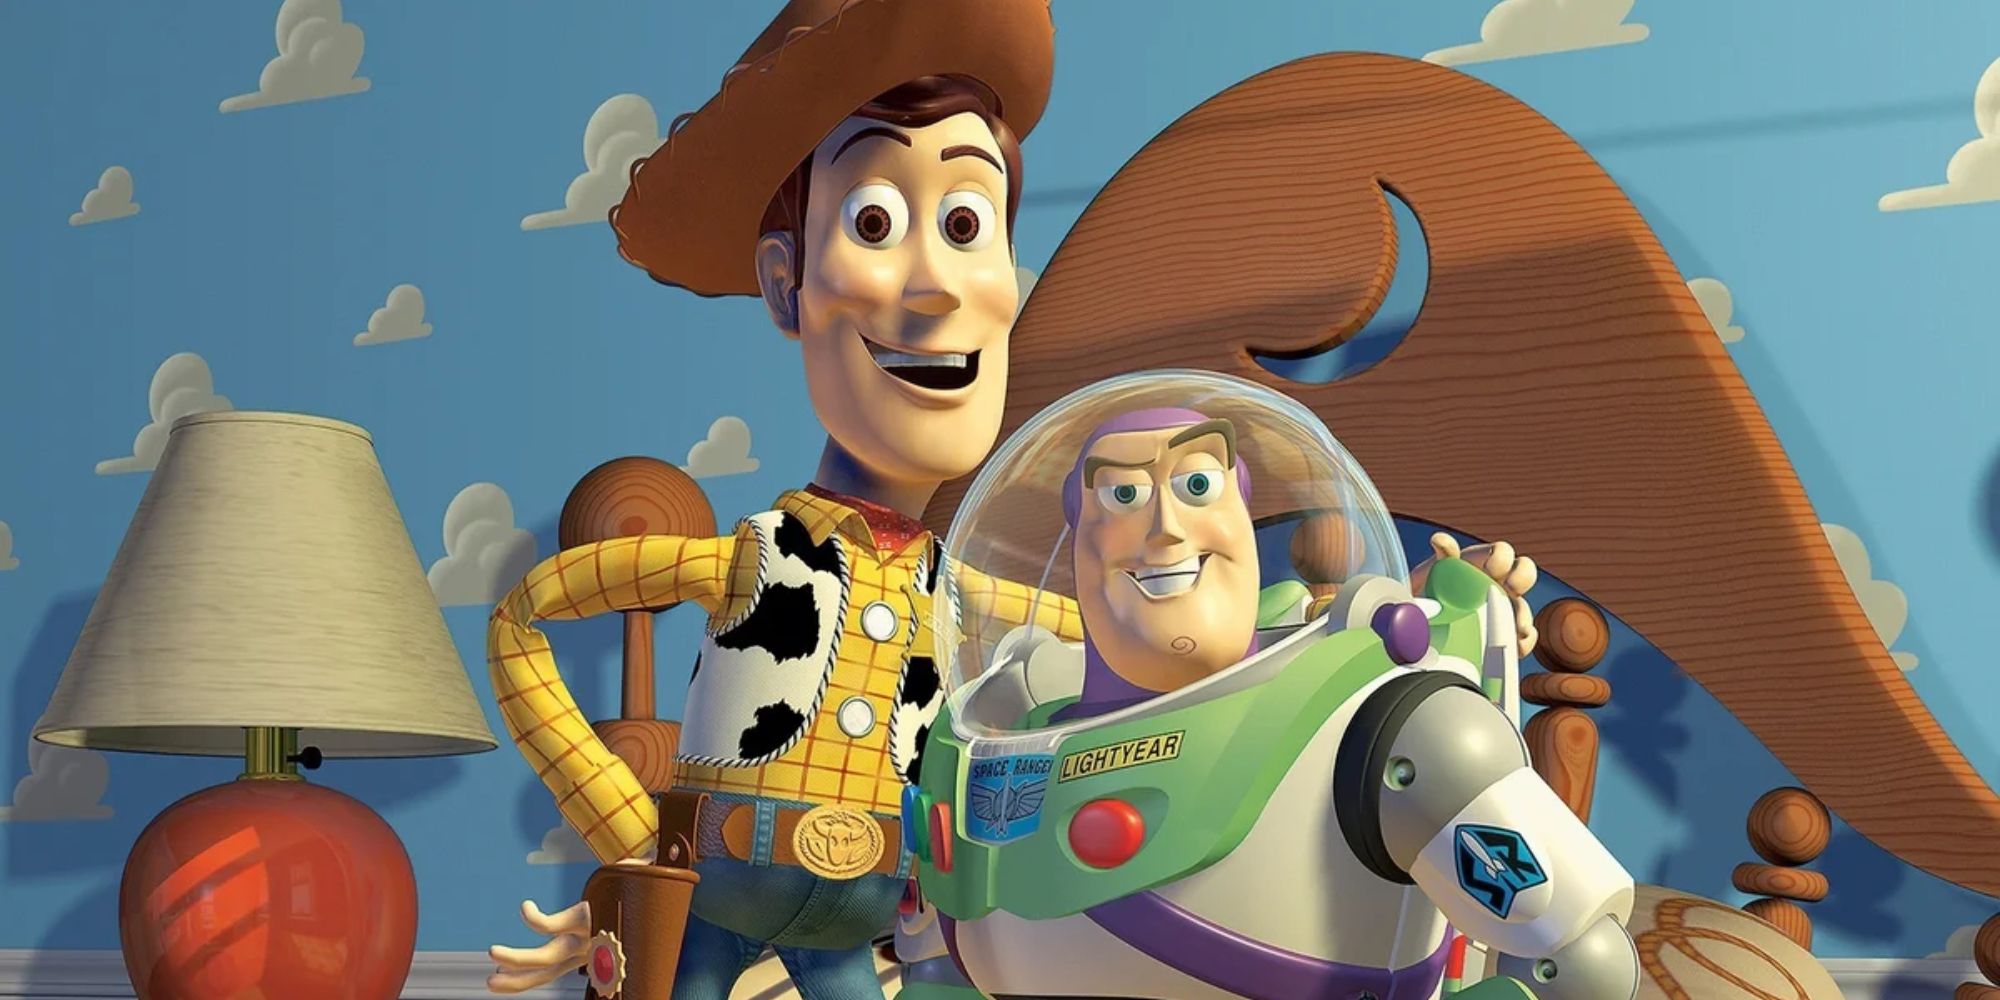 Woody and Buzz Lightyear pose together, smiling, in Toy Story